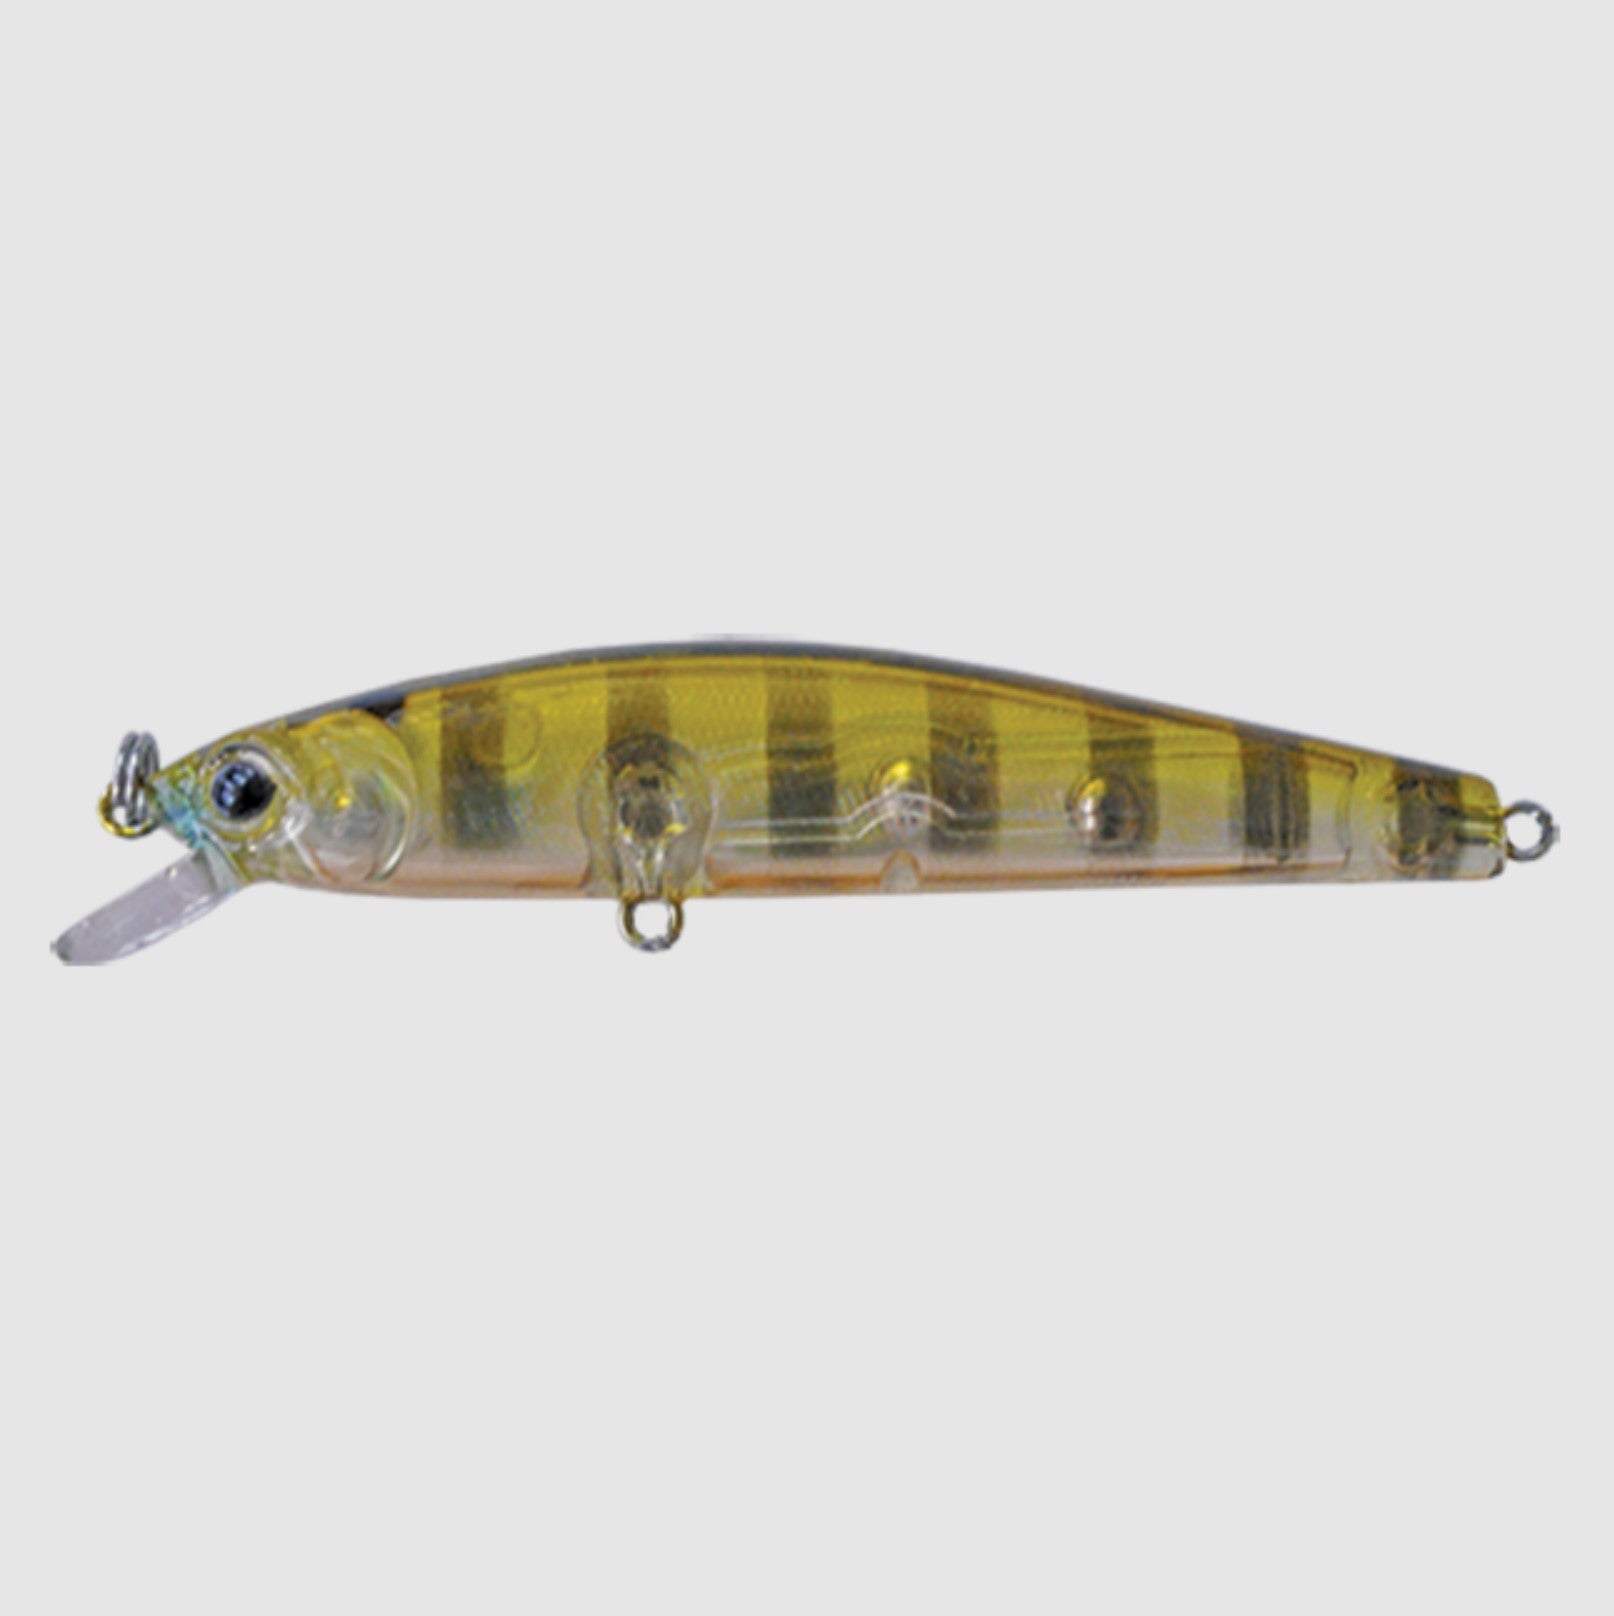 Strike Pro Flatz Minnow – Trophy Trout Lures and Fly Fishing